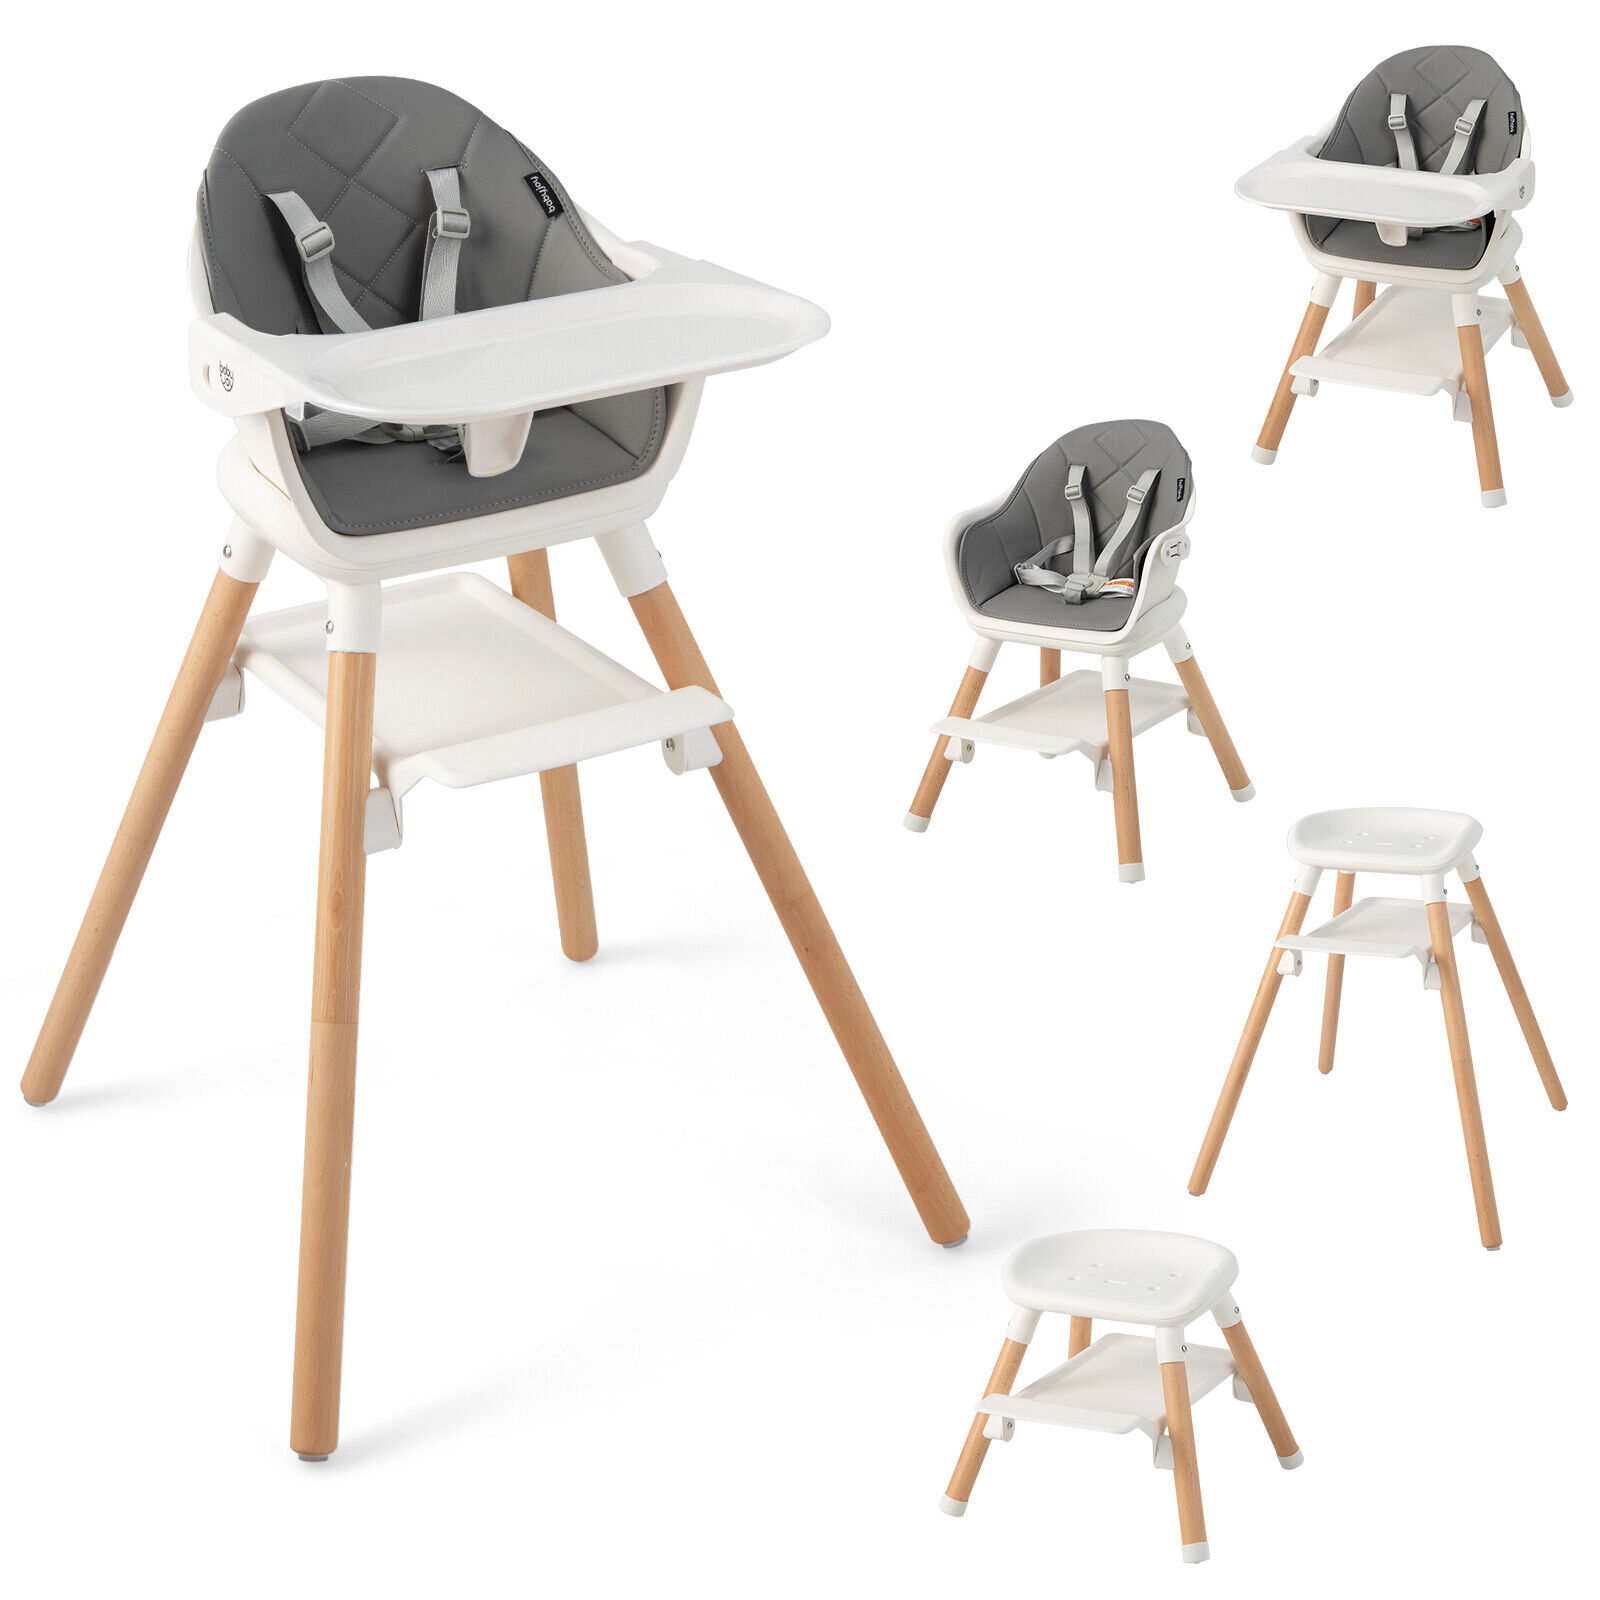 Great Choice Products 6-In-1 Convertible Wooden Baby Highchair Infant Feeding Chair W/ Removable Tray